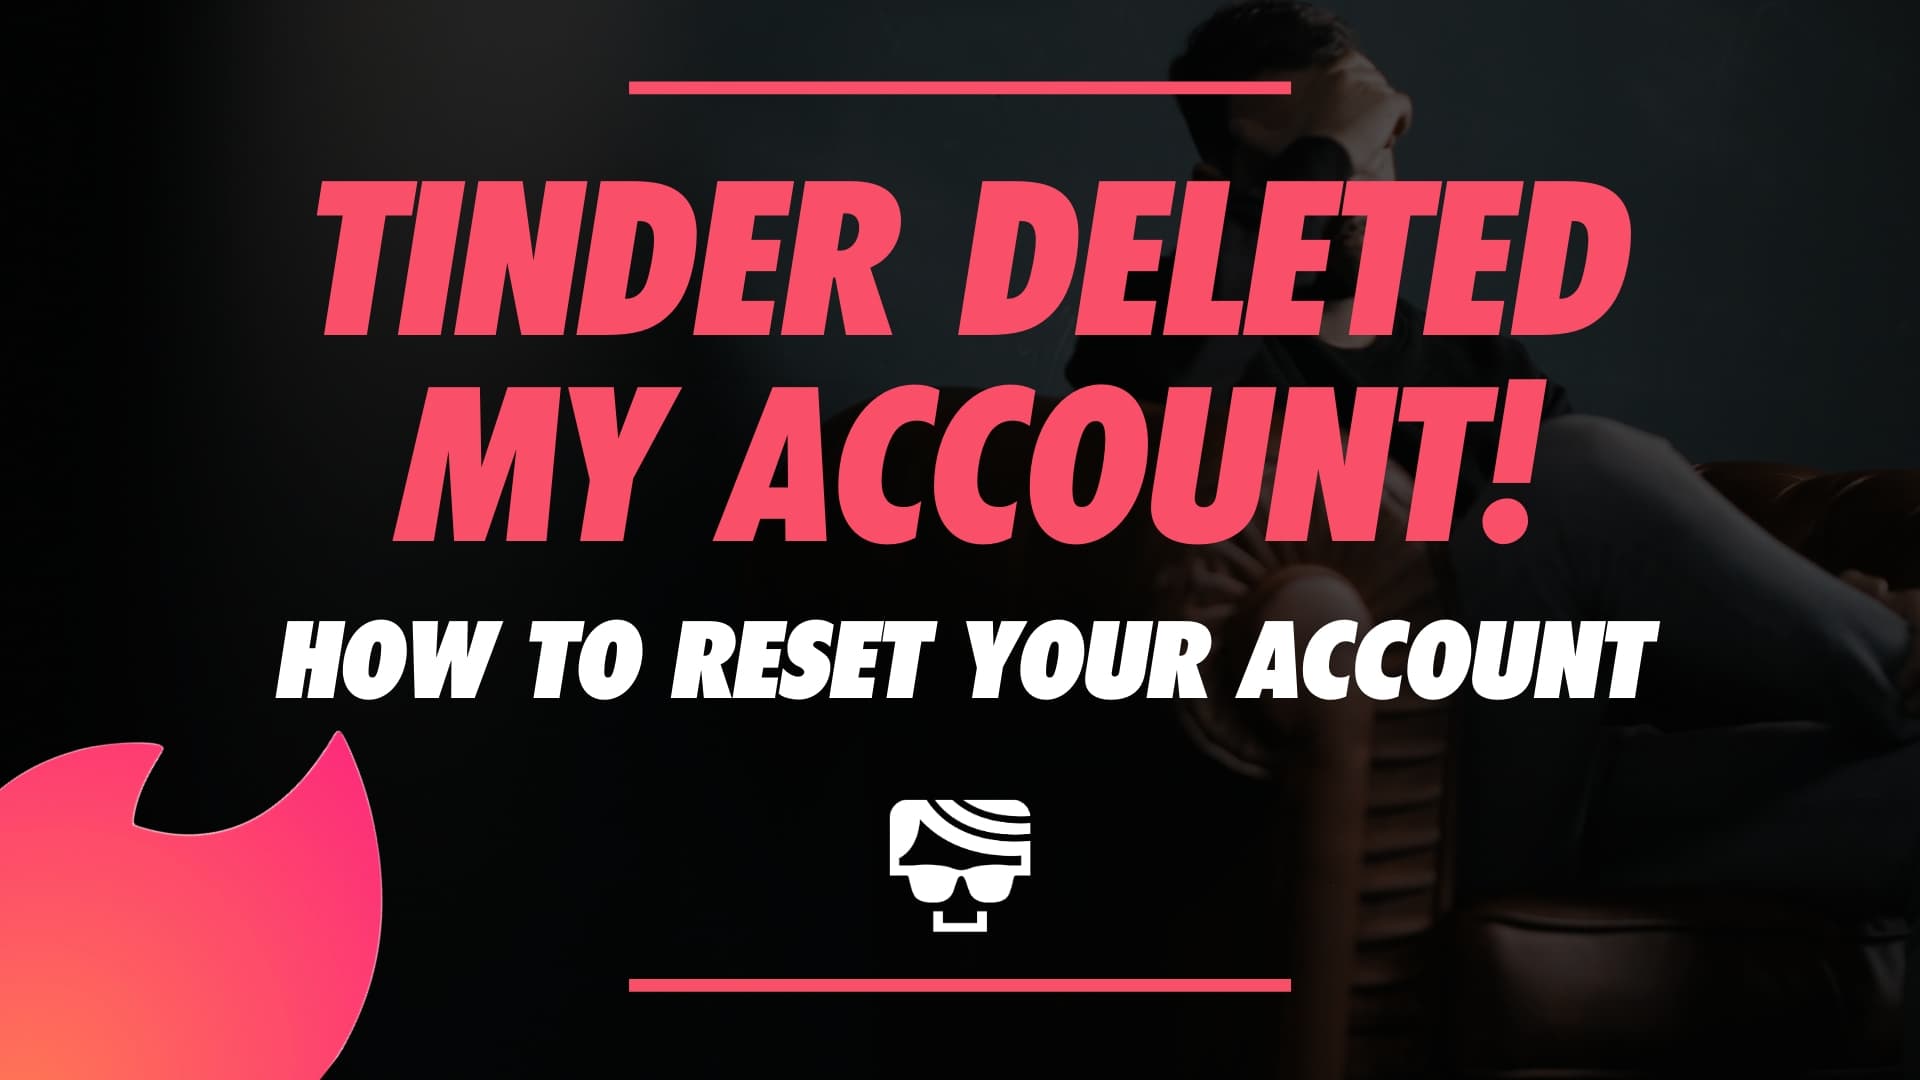 Tinder Deleted My Account! How To Reset To Get Around Tinder Ban 2023